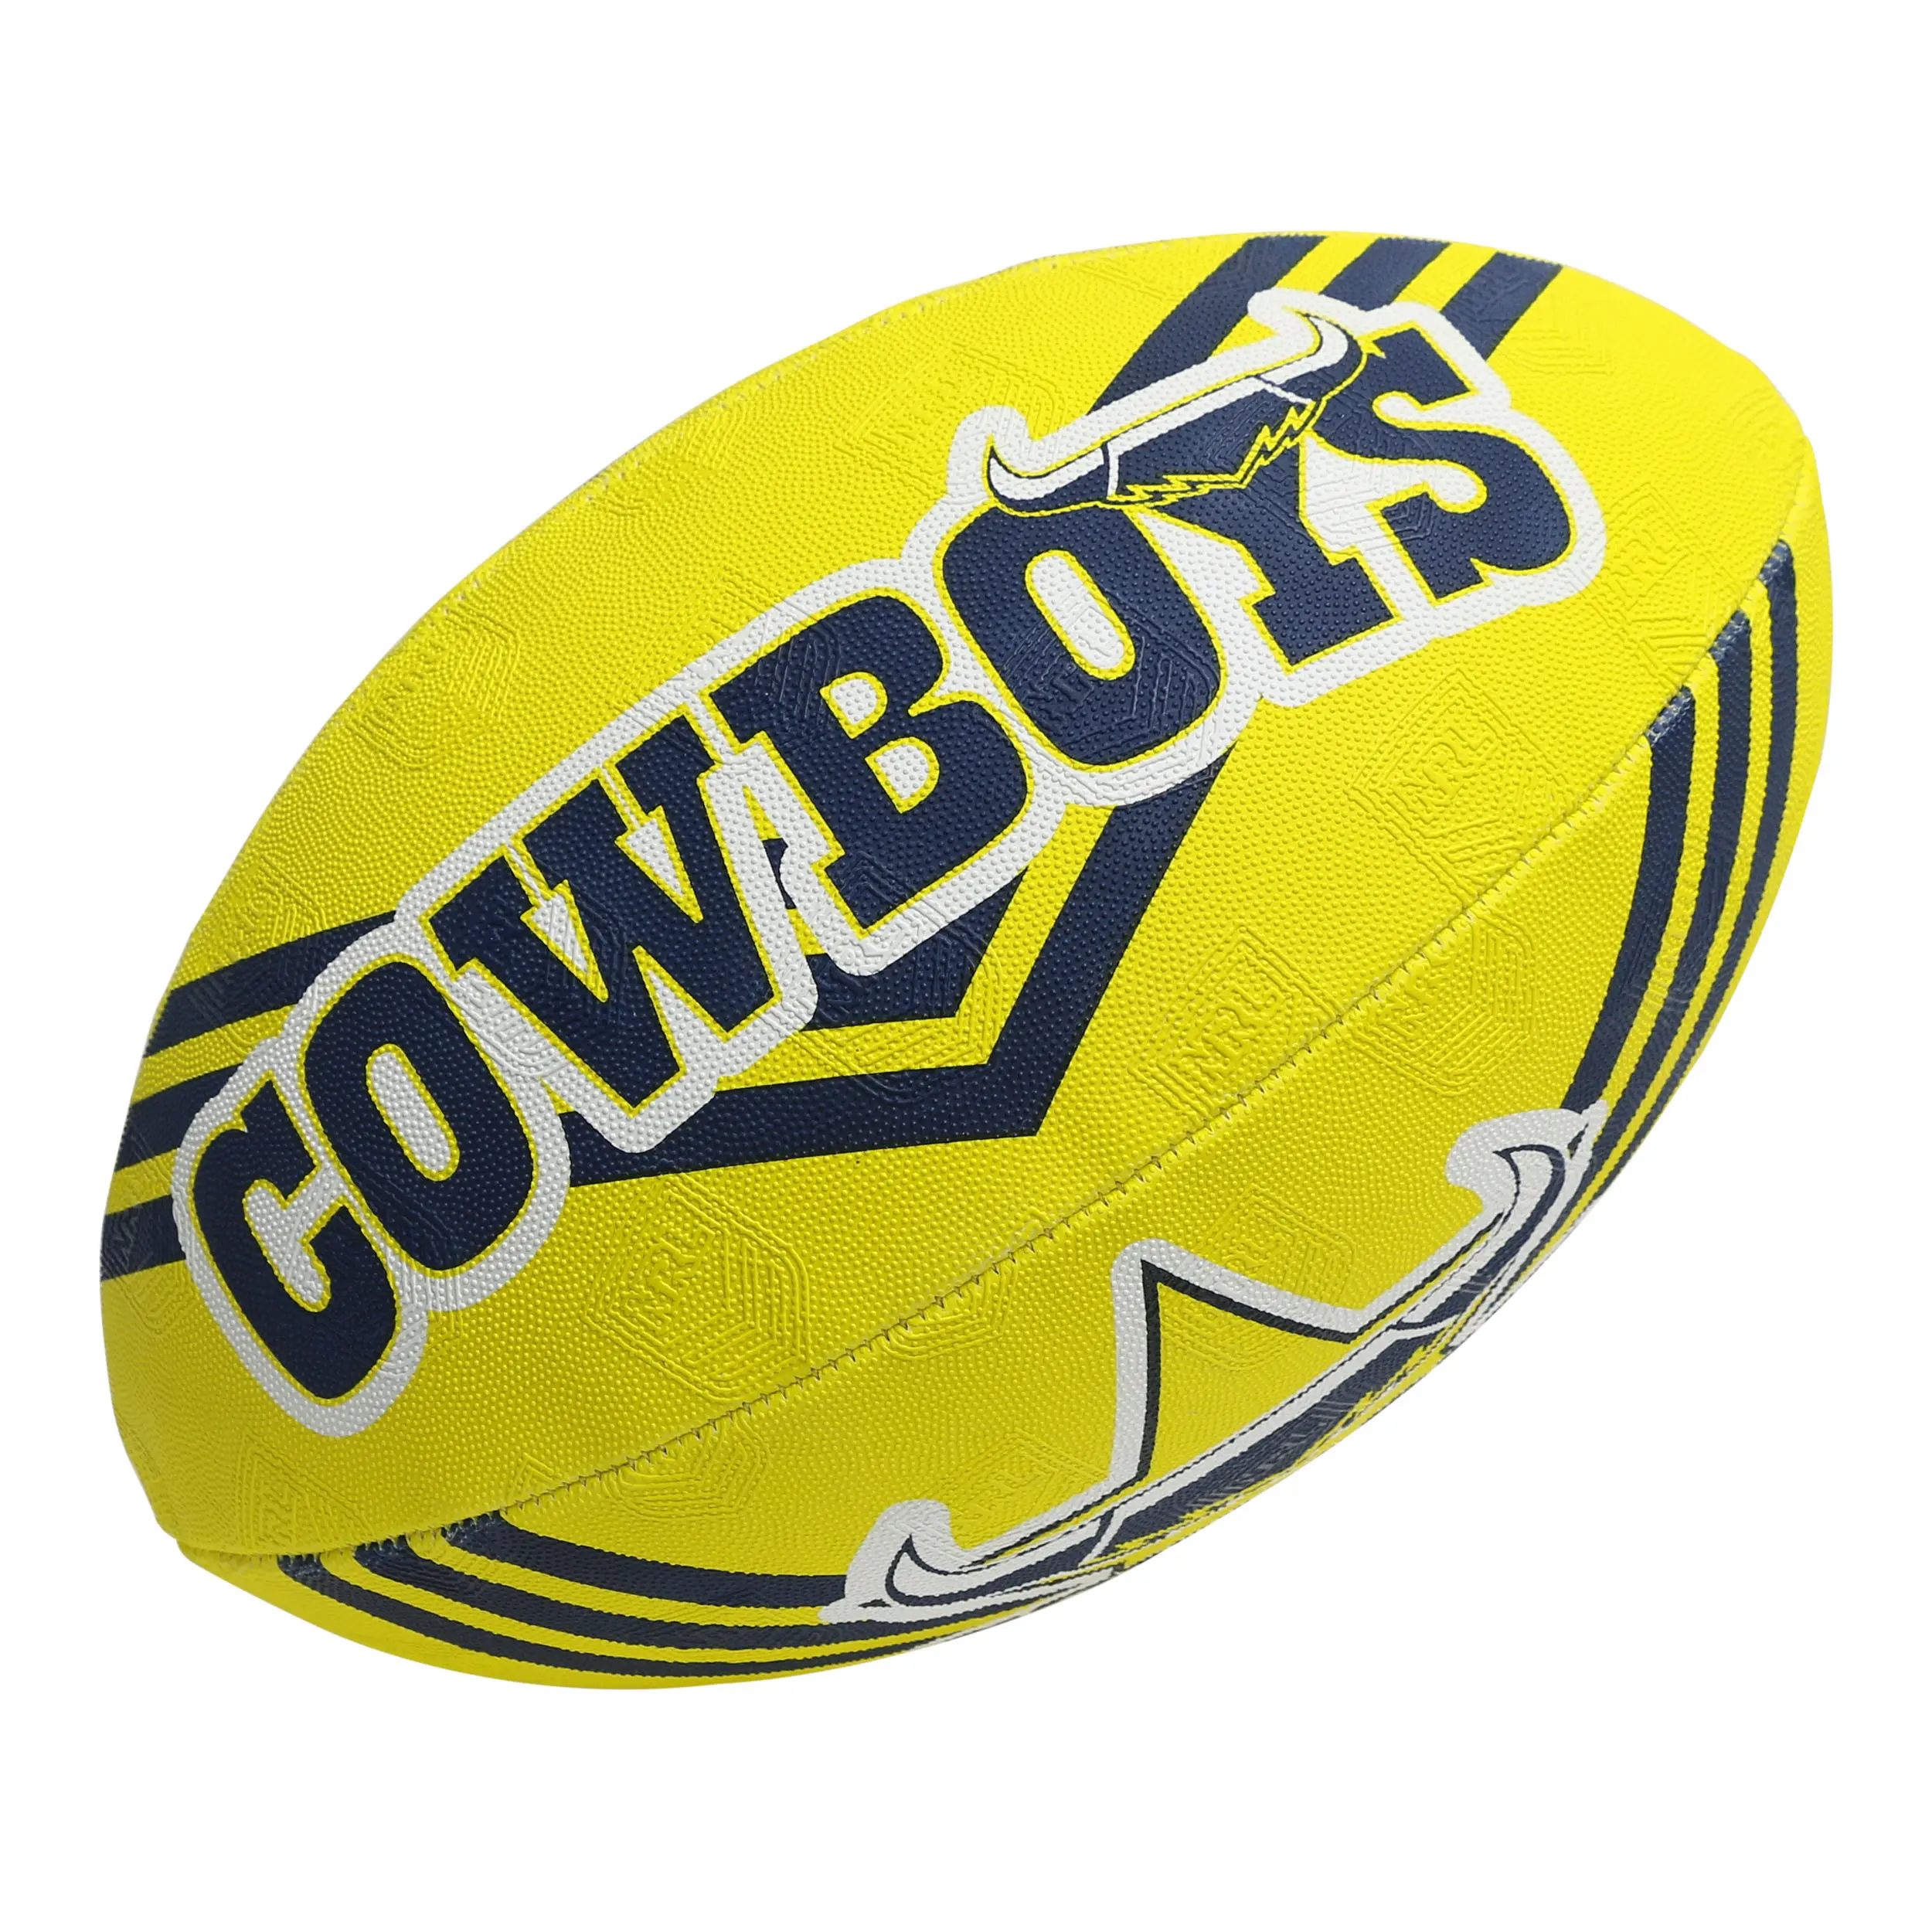 Professional Training level Touch football Touch Rugby ball Touch ball made of syn rubber fully hand sewn fitted with bladder